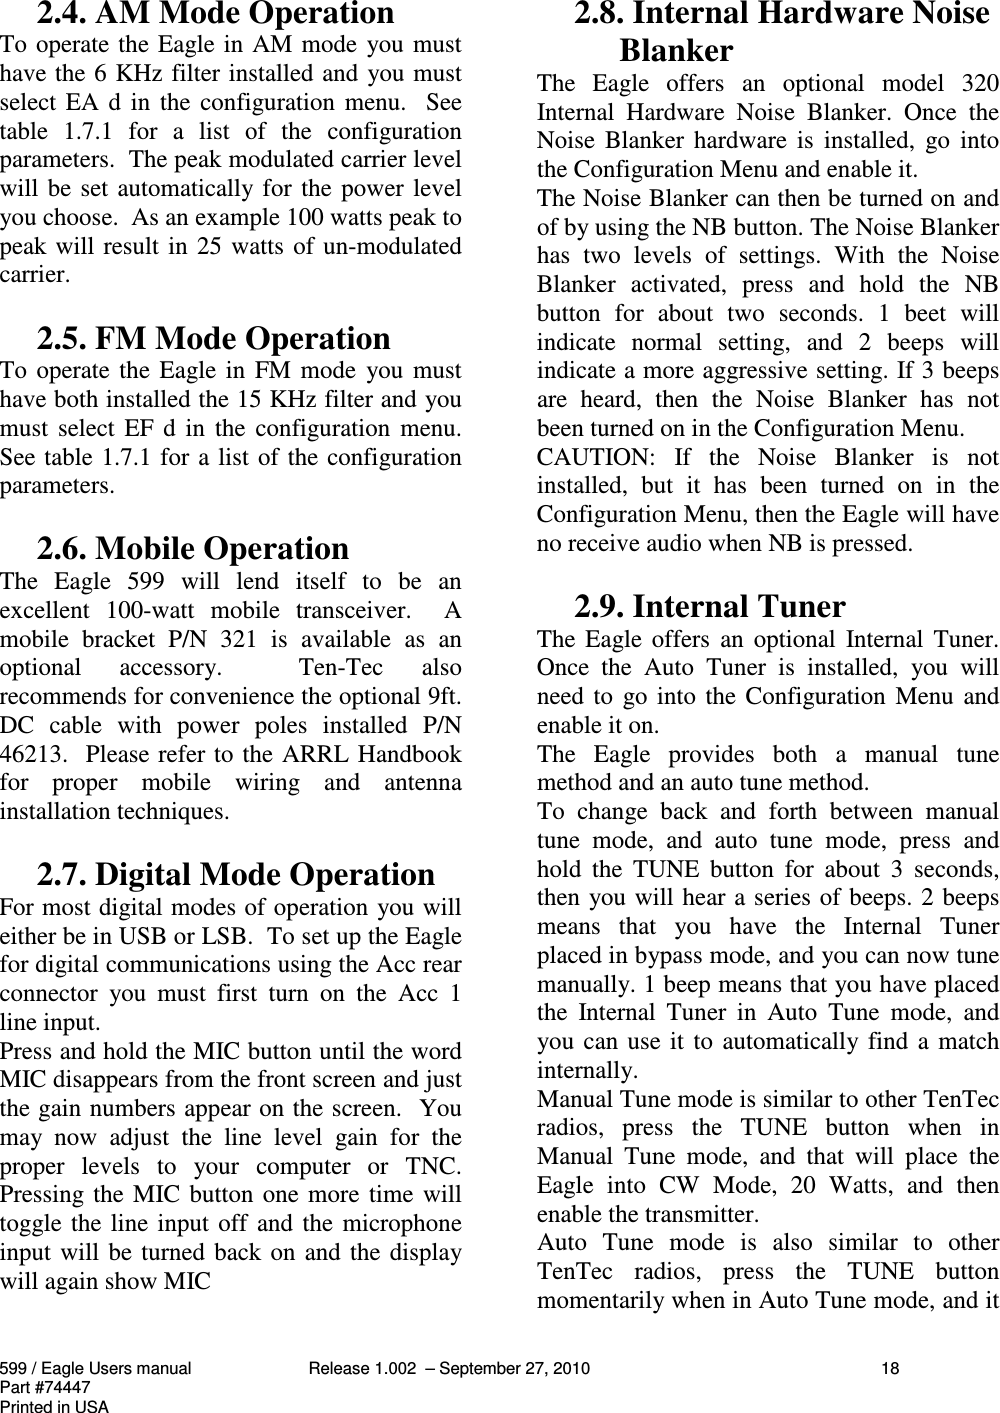 599 / Eagle Users manual Release 1.002  – September 27, 2010 18Part #74447Printed in USA2.4. AM Mode OperationTo operate the Eagle in AM mode  you musthave the 6 KHz filter installed and you mustselect EA d  in  the configuration  menu.   Seetable  1.7.1  for  a  list  of  the  configurationparameters.  The peak modulated carrier levelwill be set automatically for the power levelyou choose.  As an example 100 watts peak topeak will result in 25 watts of un-modulatedcarrier.2.5. FM Mode OperationTo operate the Eagle in  FM mode  you musthave both installed the 15 KHz filter and youmust select EF d  in  the  configuration  menu.See table 1.7.1 for a list of the configurationparameters.2.6. Mobile OperationThe  Eagle  599  will  lend  itself  to  be  anexcellent  100-watt  mobile  transceiver.    Amobile  bracket  P/N  321  is  available  as  anoptional  accessory.    Ten-Tec  alsorecommends for convenience the optional 9ft.DC  cable  with  power  poles  installed  P/N46213.  Please refer to the ARRL Handbookfor  proper  mobile  wiring  and  antennainstallation techniques.2.7. Digital Mode OperationFor most digital modes of operation you willeither be in USB or LSB.  To set up the Eaglefor digital communications using the Acc rearconnector  you  must  first  turn  on  the  Acc  1line input.Press and hold the MIC button until the wordMIC disappears from the front screen and justthe gain numbers appear on the screen.  Youmay  now  adjust  the  line  level  gain  for  theproper  levels  to  your  computer  or  TNC.Pressing the MIC button one more time willtoggle the line input off and the microphoneinput will be turned back on and the displaywill again show MIC2.8. Internal Hardware NoiseBlankerThe  Eagle  offers  an  optional  model  320Internal  Hardware  Noise  Blanker.  Once  theNoise  Blanker  hardware  is  installed,  go intothe Configuration Menu and enable it.The Noise Blanker can then be turned on andof by using the NB button. The Noise Blankerhas  two  levels  of  settings.  With  the  NoiseBlanker  activated,  press  and  hold  the  NBbutton  for  about  two  seconds.  1  beet  willindicate  normal  setting,  and  2  beeps  willindicate a more aggressive setting. If 3 beepsare  heard,  then  the  Noise  Blanker  has  notbeen turned on in the Configuration Menu.CAUTION:  If  the  Noise  Blanker  is  notinstalled,  but  it  has  been  turned  on  in  theConfiguration Menu, then the Eagle will haveno receive audio when NB is pressed.2.9. Internal TunerThe Eagle offers  an optional  Internal Tuner.Once  the  Auto  Tuner  is  installed,  you  willneed to  go into the Configuration  Menu  andenable it on.The  Eagle  provides  both  a  manual  tunemethod and an auto tune method.To  change  back  and  forth  between  manualtune  mode,  and  auto  tune  mode,  press  andhold  the  TUNE  button  for  about  3  seconds,then you will hear a series of beeps. 2 beepsmeans  that  you  have  the  Internal  Tunerplaced in bypass mode, and you can now tunemanually. 1 beep means that you have placedthe  Internal  Tuner  in  Auto  Tune  mode,  andyou can use it to automatically find a matchinternally.Manual Tune mode is similar to other TenTecradios,  press  the  TUNE  button  when  inManual  Tune  mode,  and  that  will  place  theEagle  into  CW  Mode,  20  Watts,  and  thenenable the transmitter.Auto  Tune  mode  is  also  similar  to  otherTenTec  radios,  press  the  TUNE  buttonmomentarily when in Auto Tune mode, and it